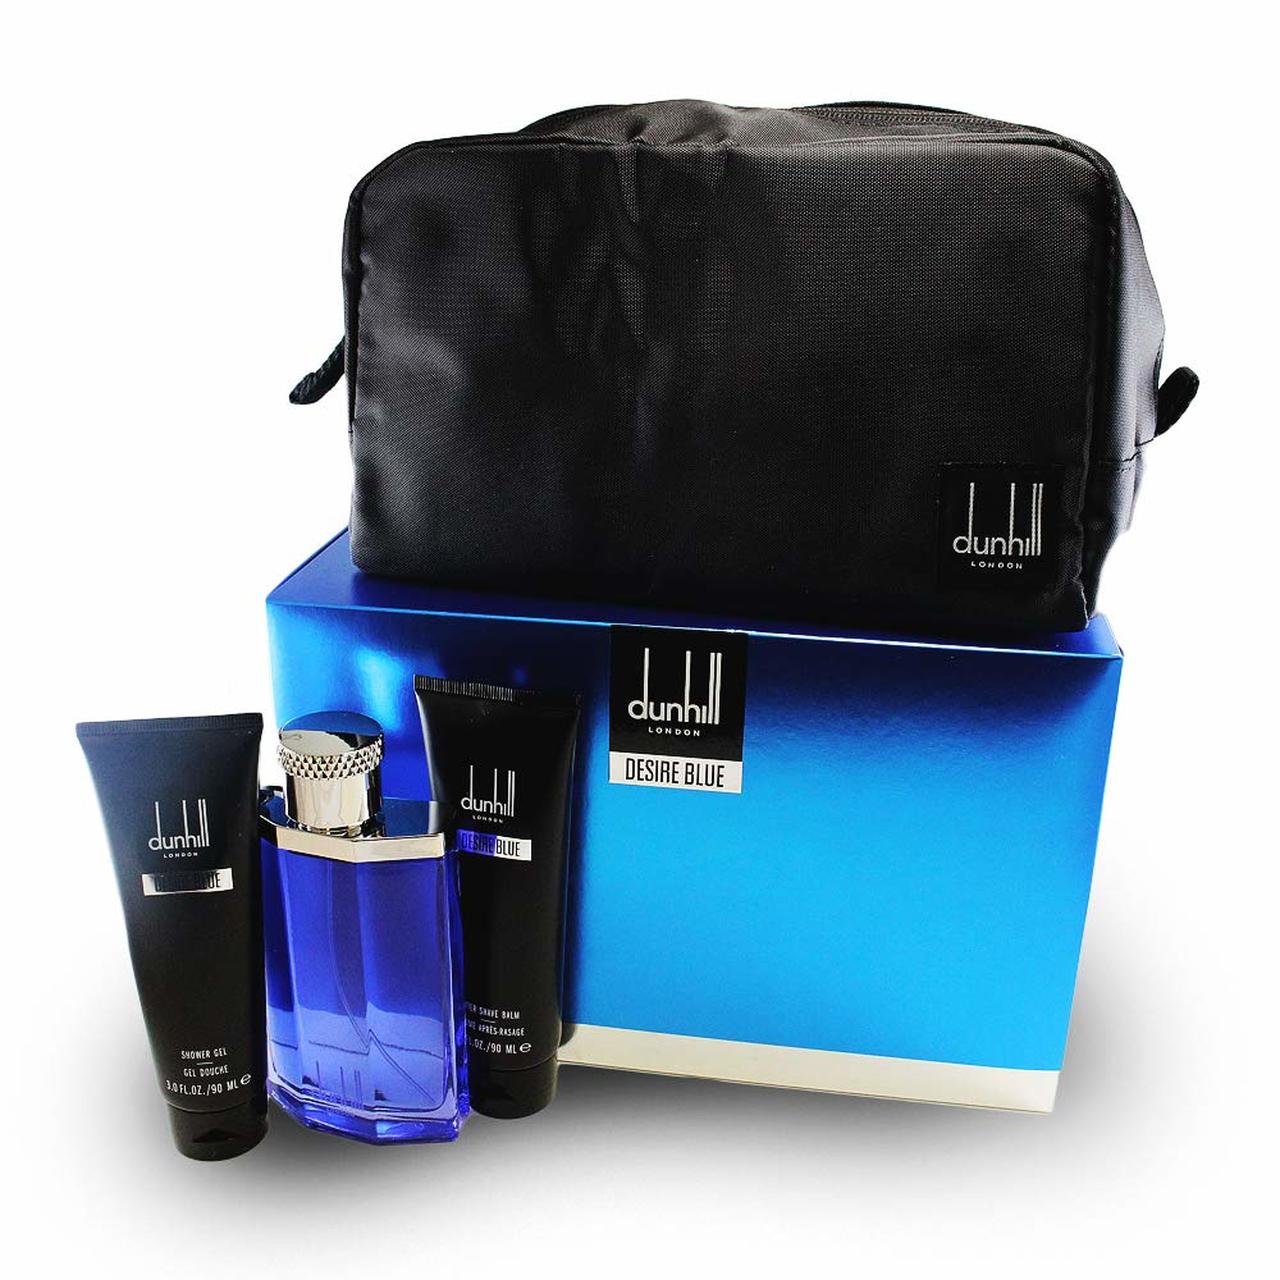 dunhill toiletry bag